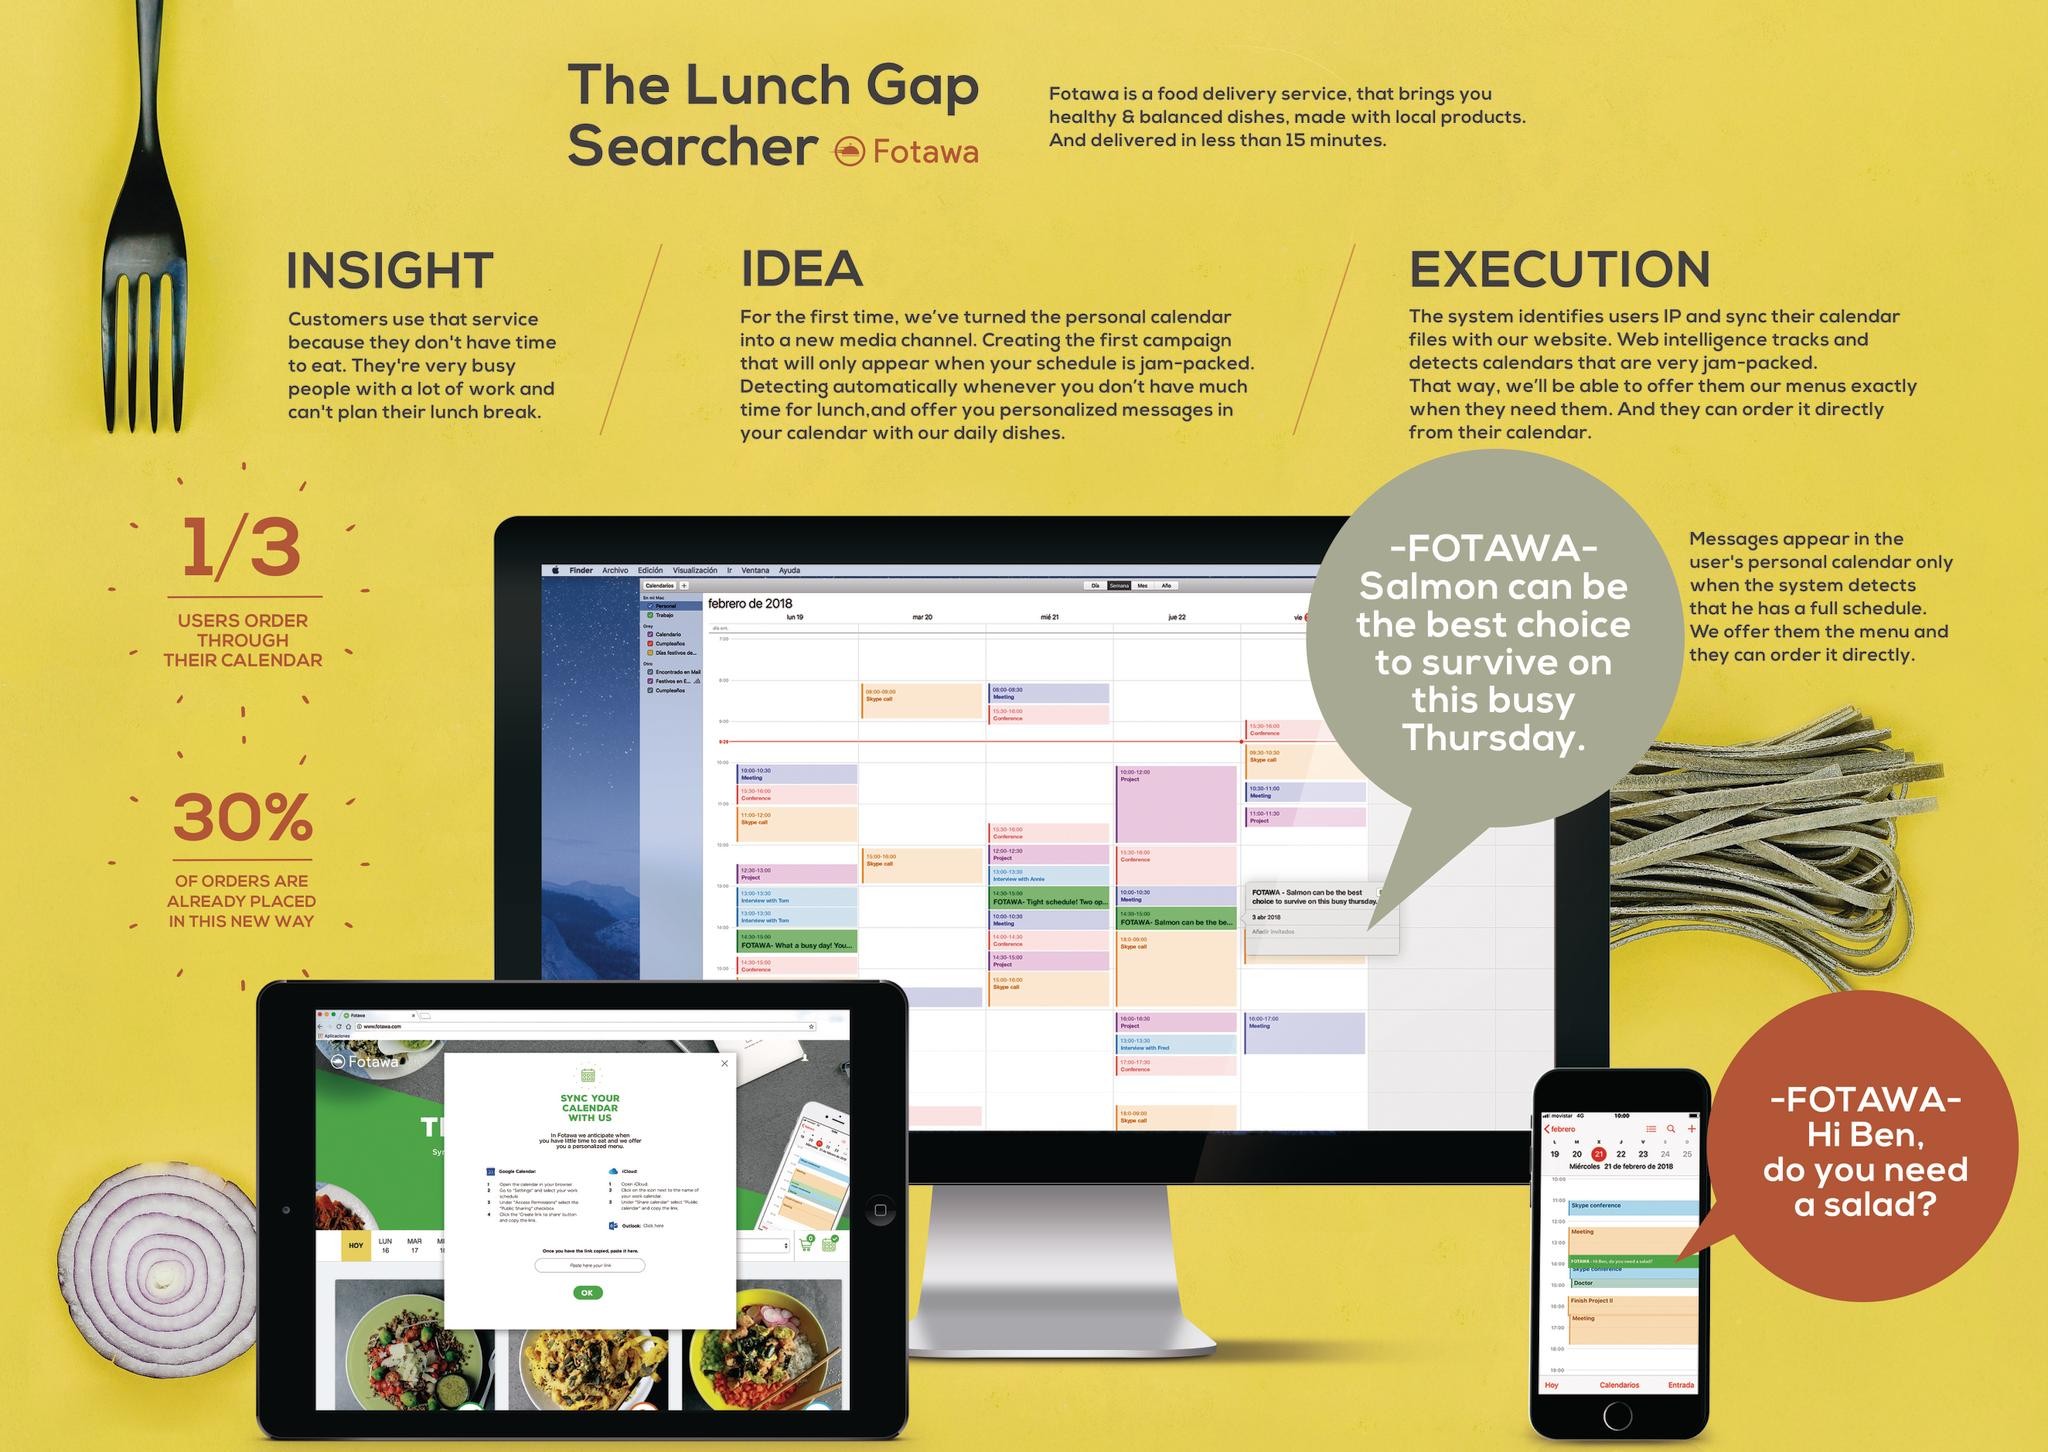 THE LUNCH GAP SEARCHER